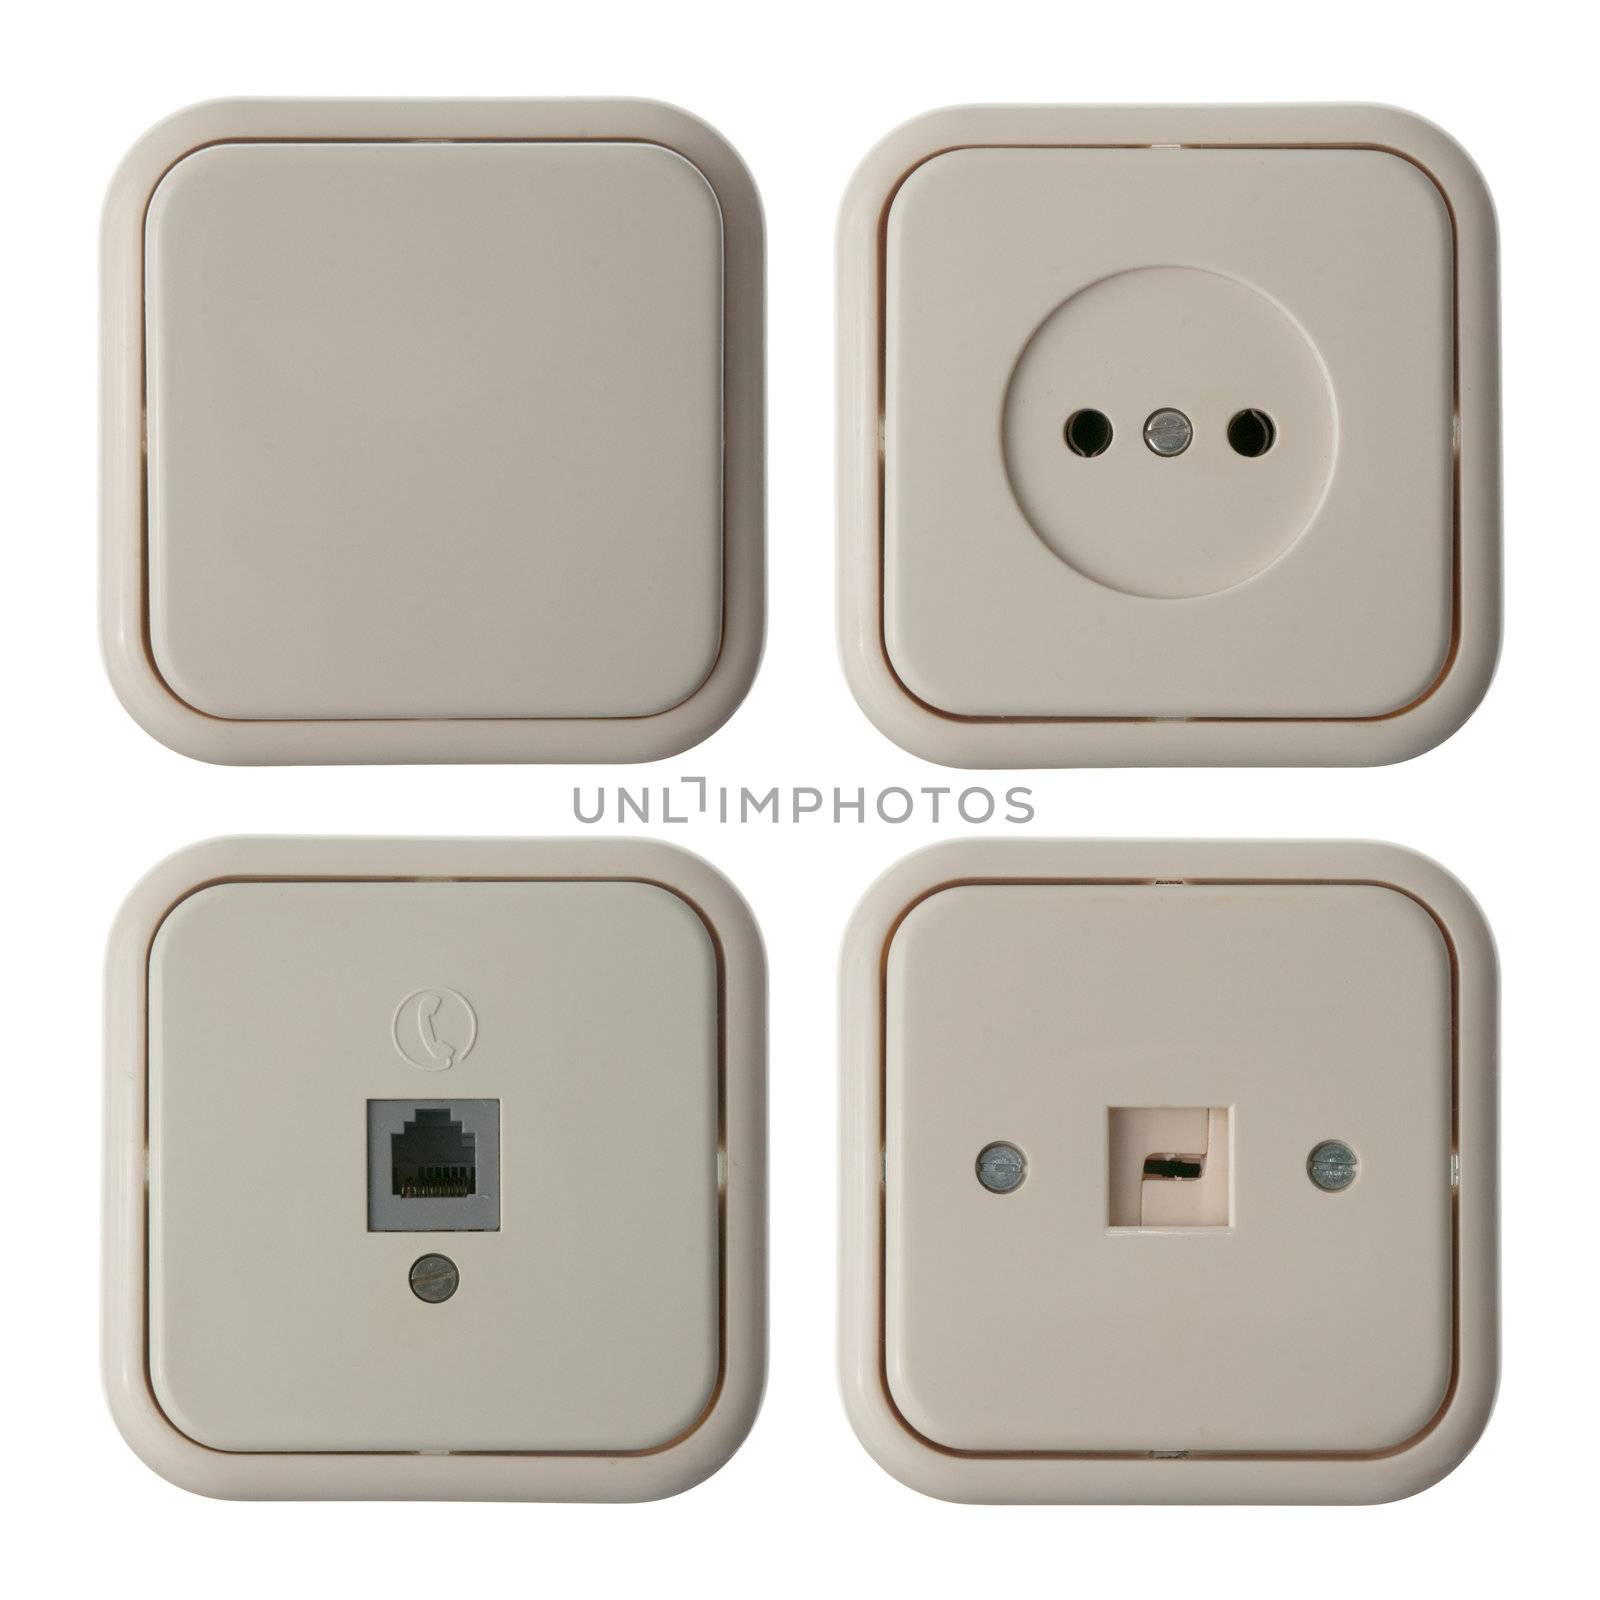 Four wall mounted electrical plates isolated on white background. Plug, switch, TV and phone.